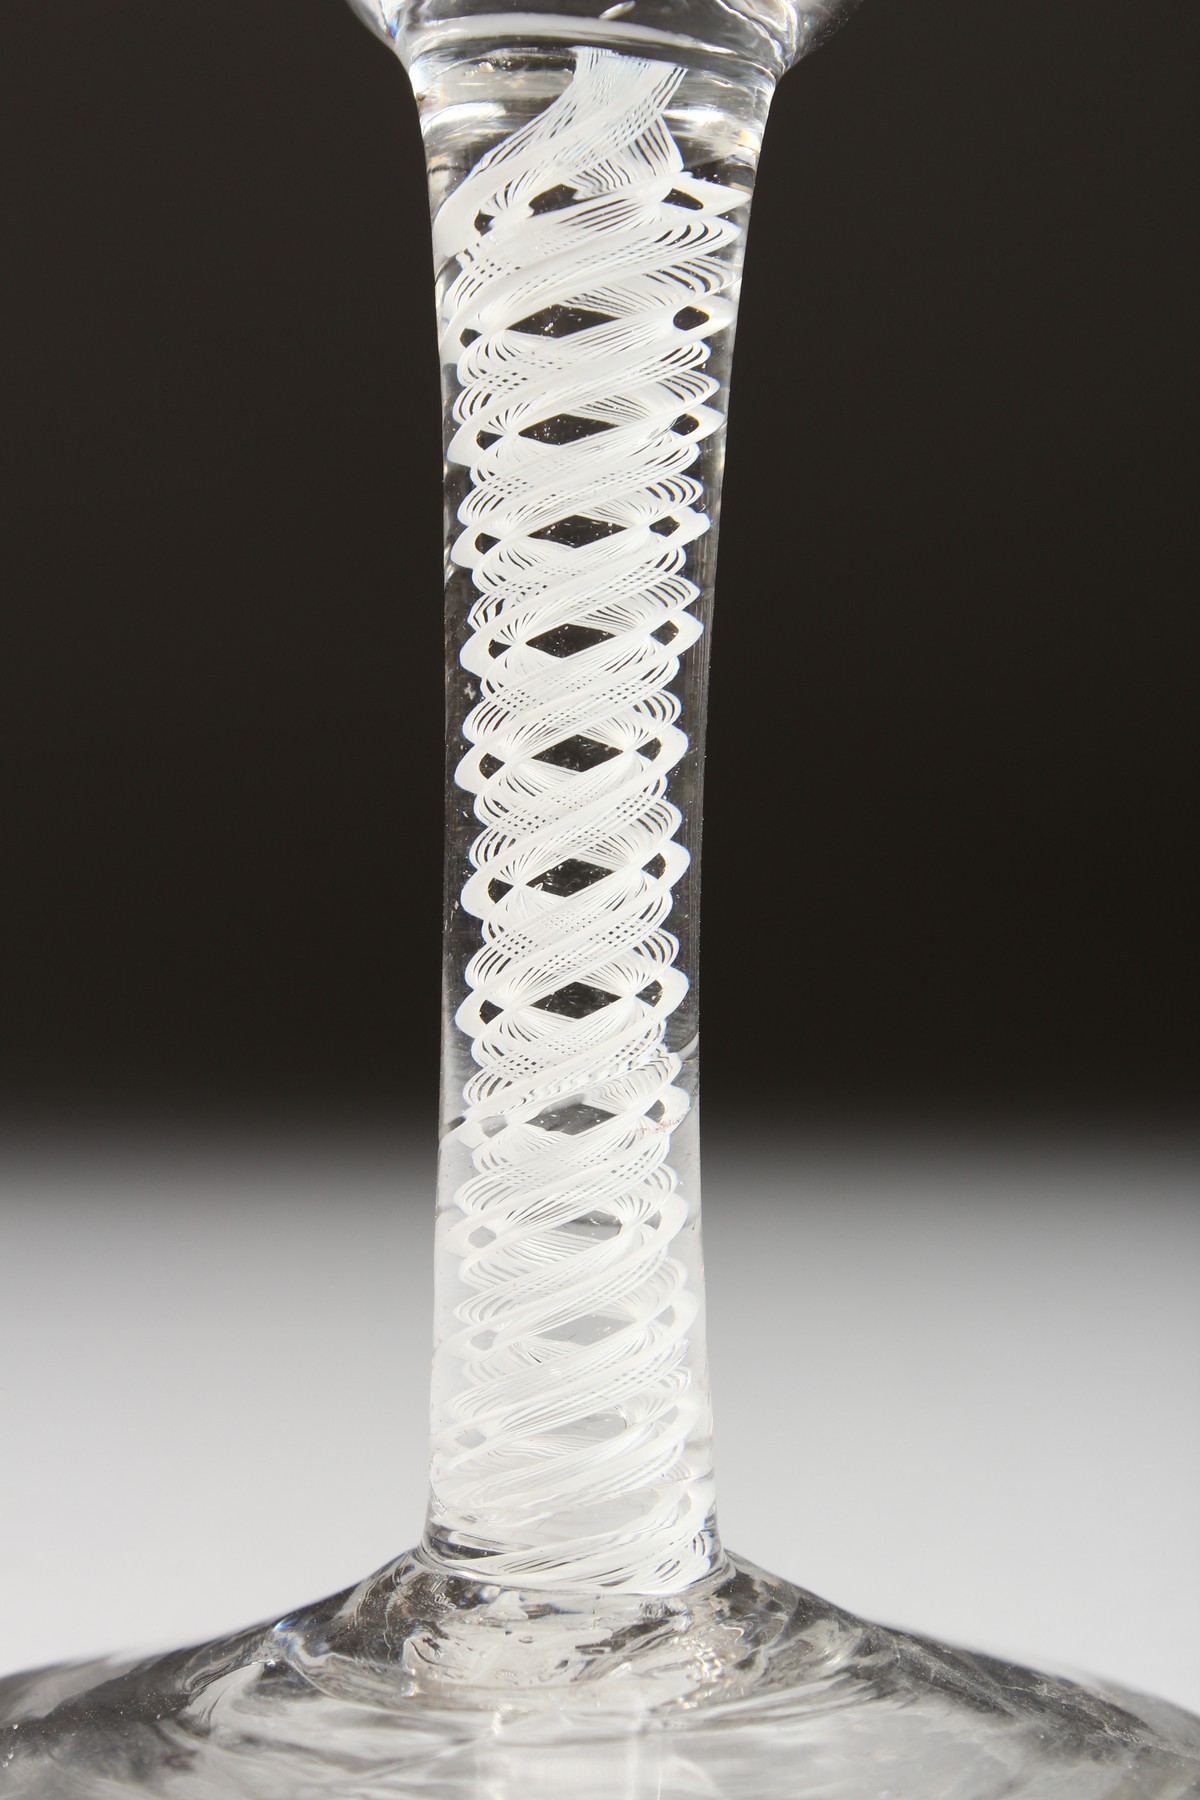 A GEORGIAN WINE GLASS, the bowl engraved with fruiting vines with white twist stem. 5.25ins high. - Image 6 of 7